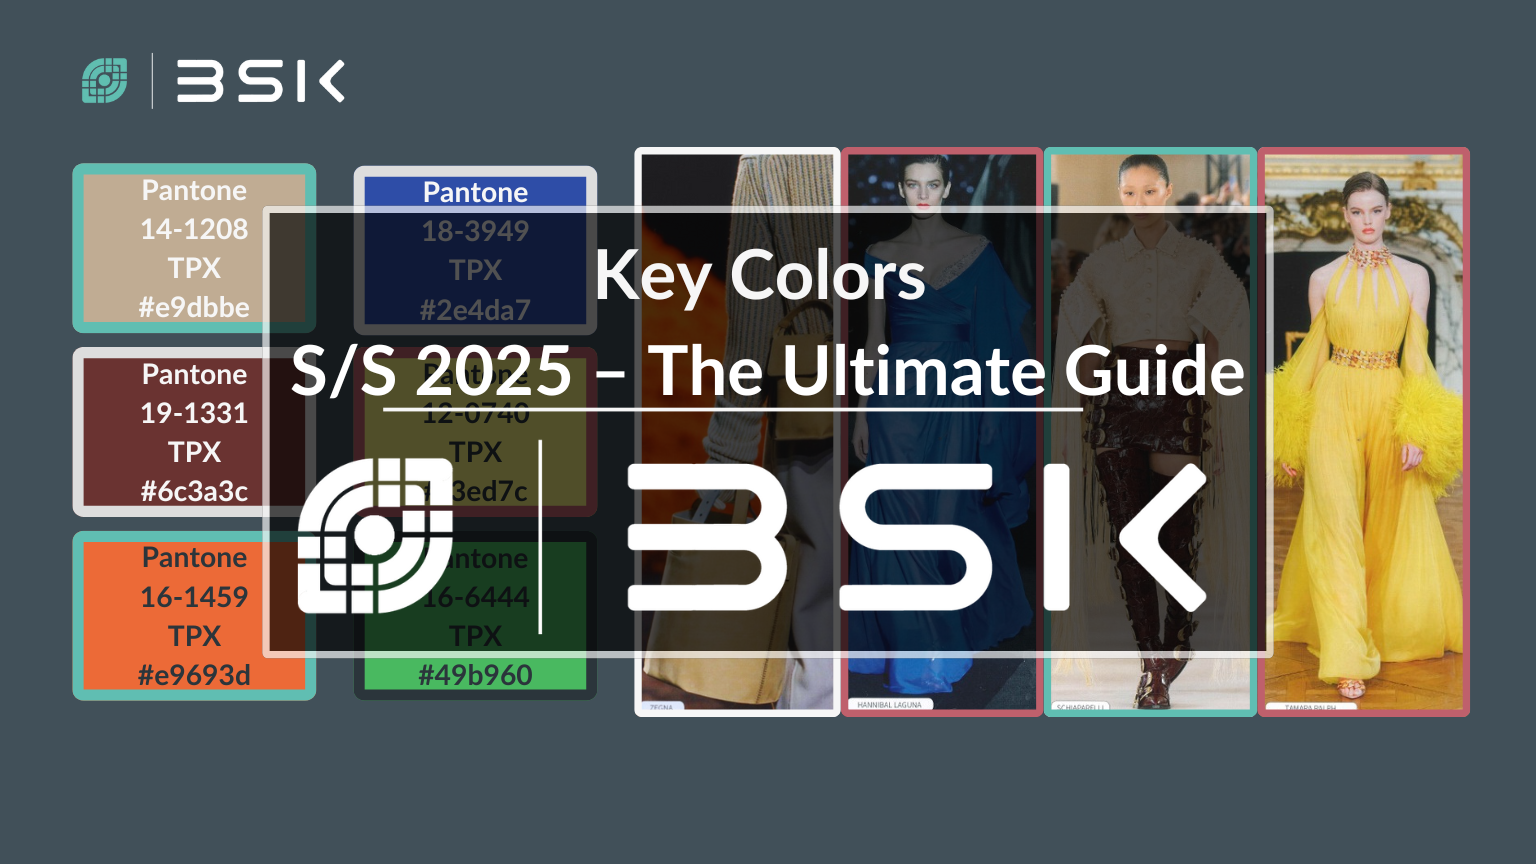 Key Colors S/S 2025 - The Ultimate Guide